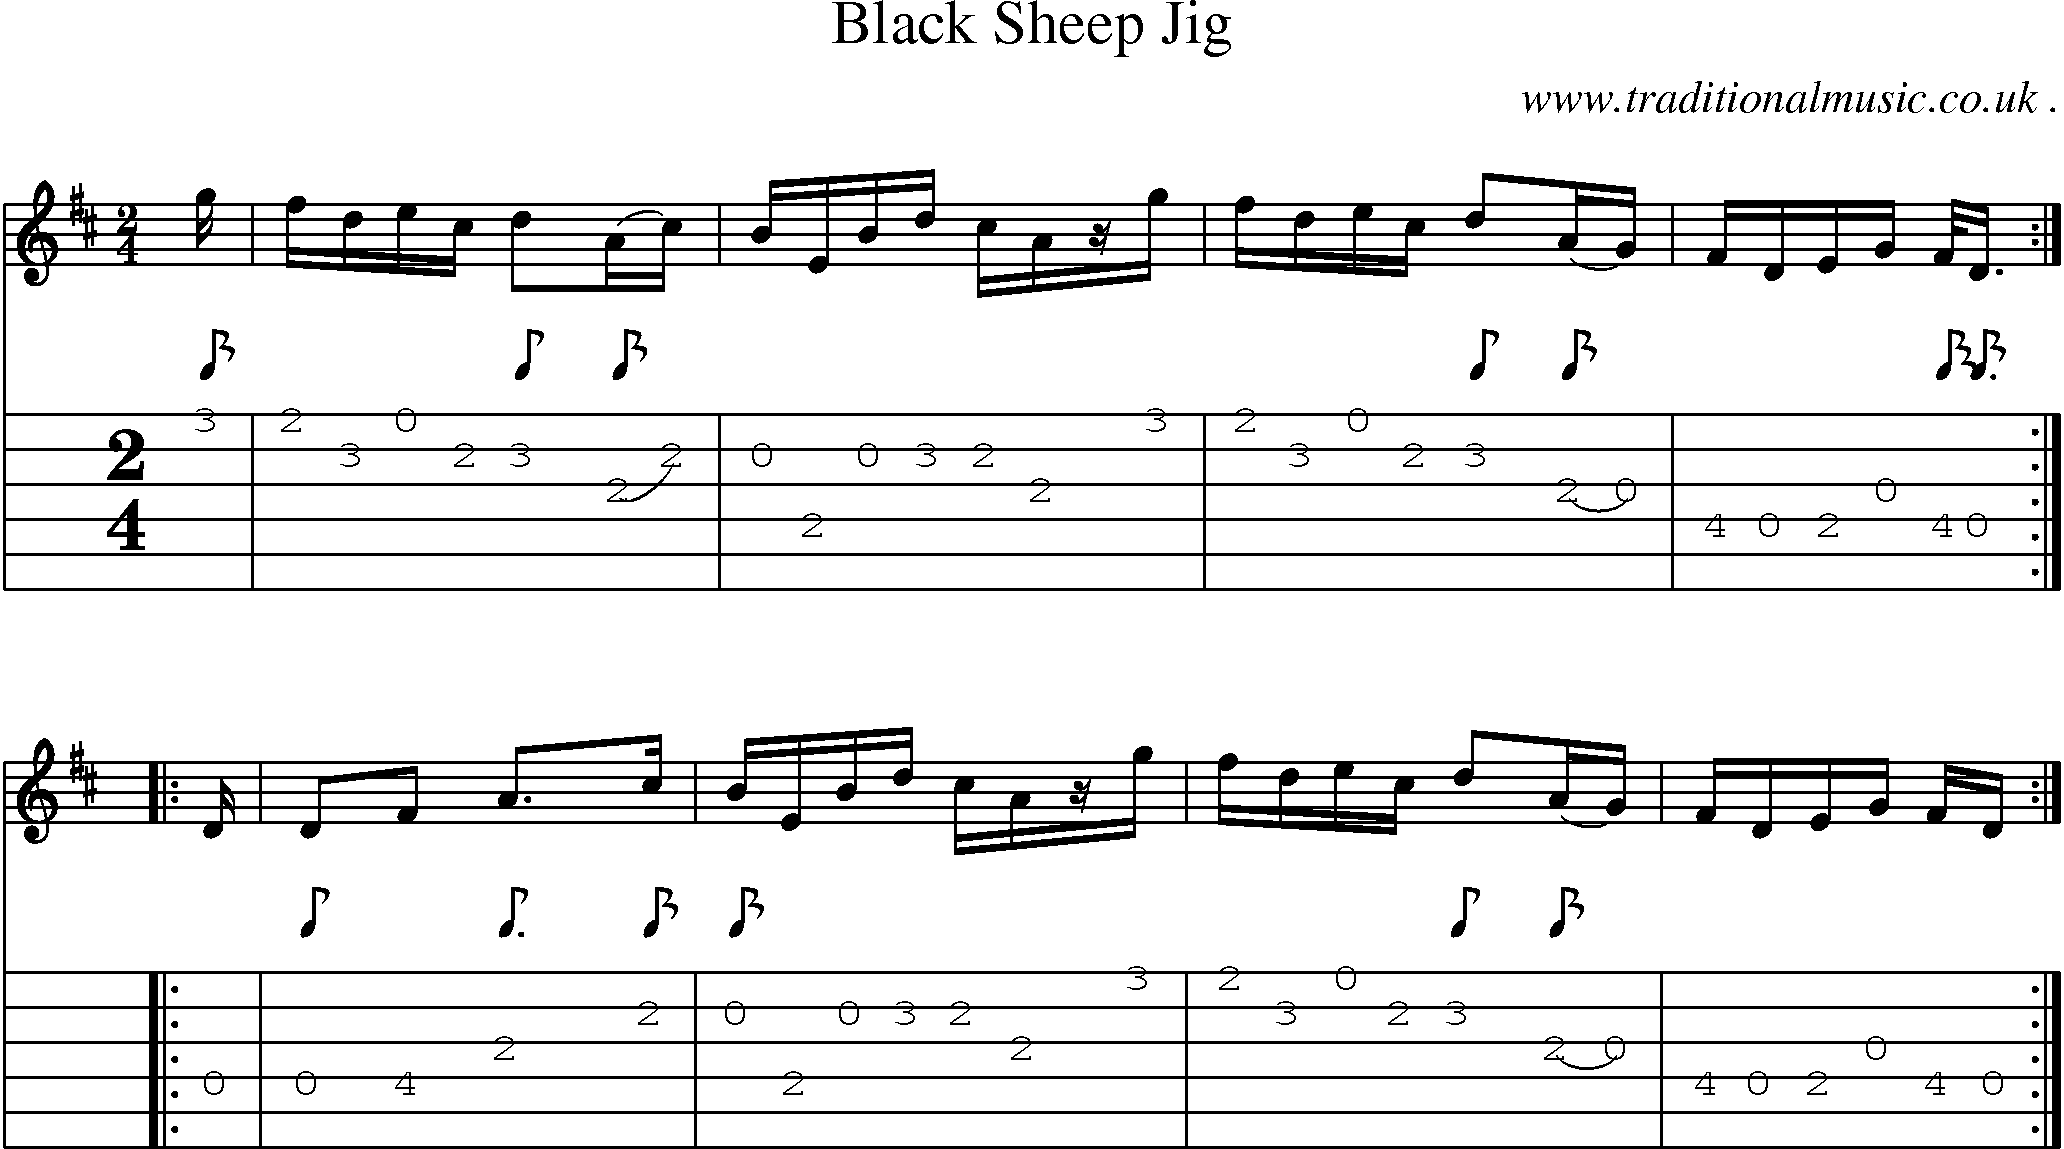 Sheet-Music and Guitar Tabs for Black Sheep Jig